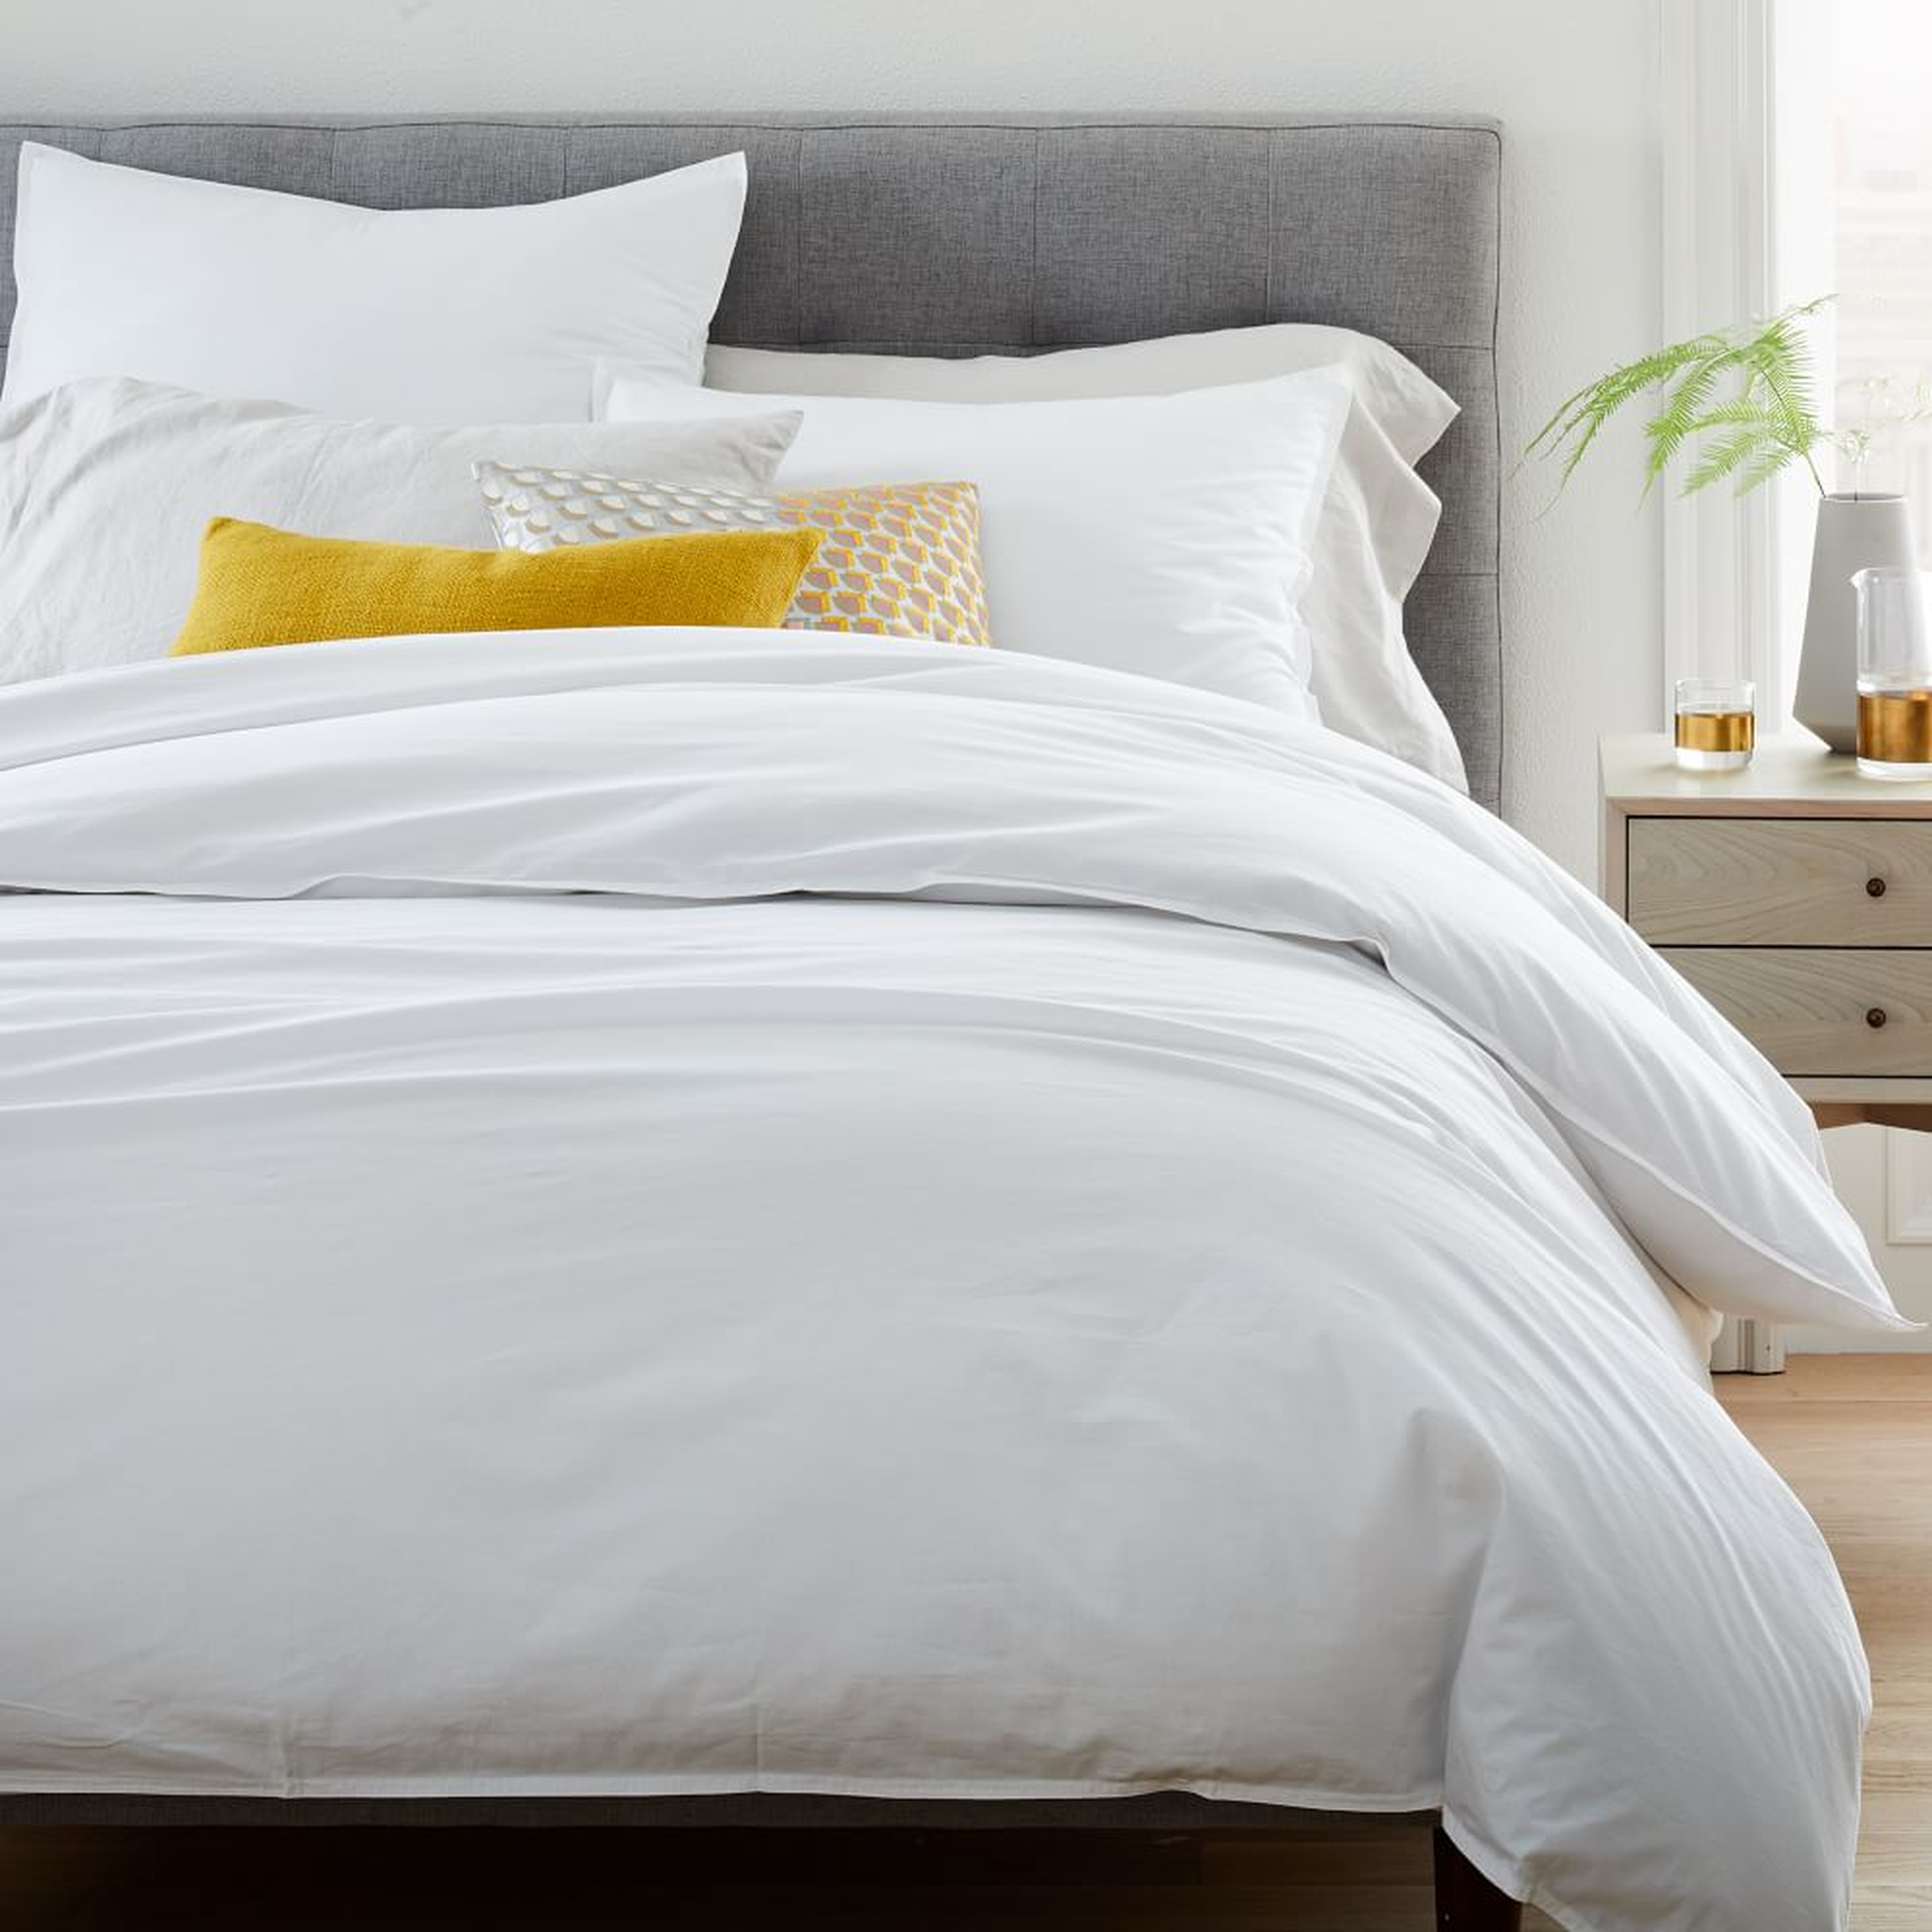 Organic Washed Cotton Percale Full/Queen Duvet, White - West Elm